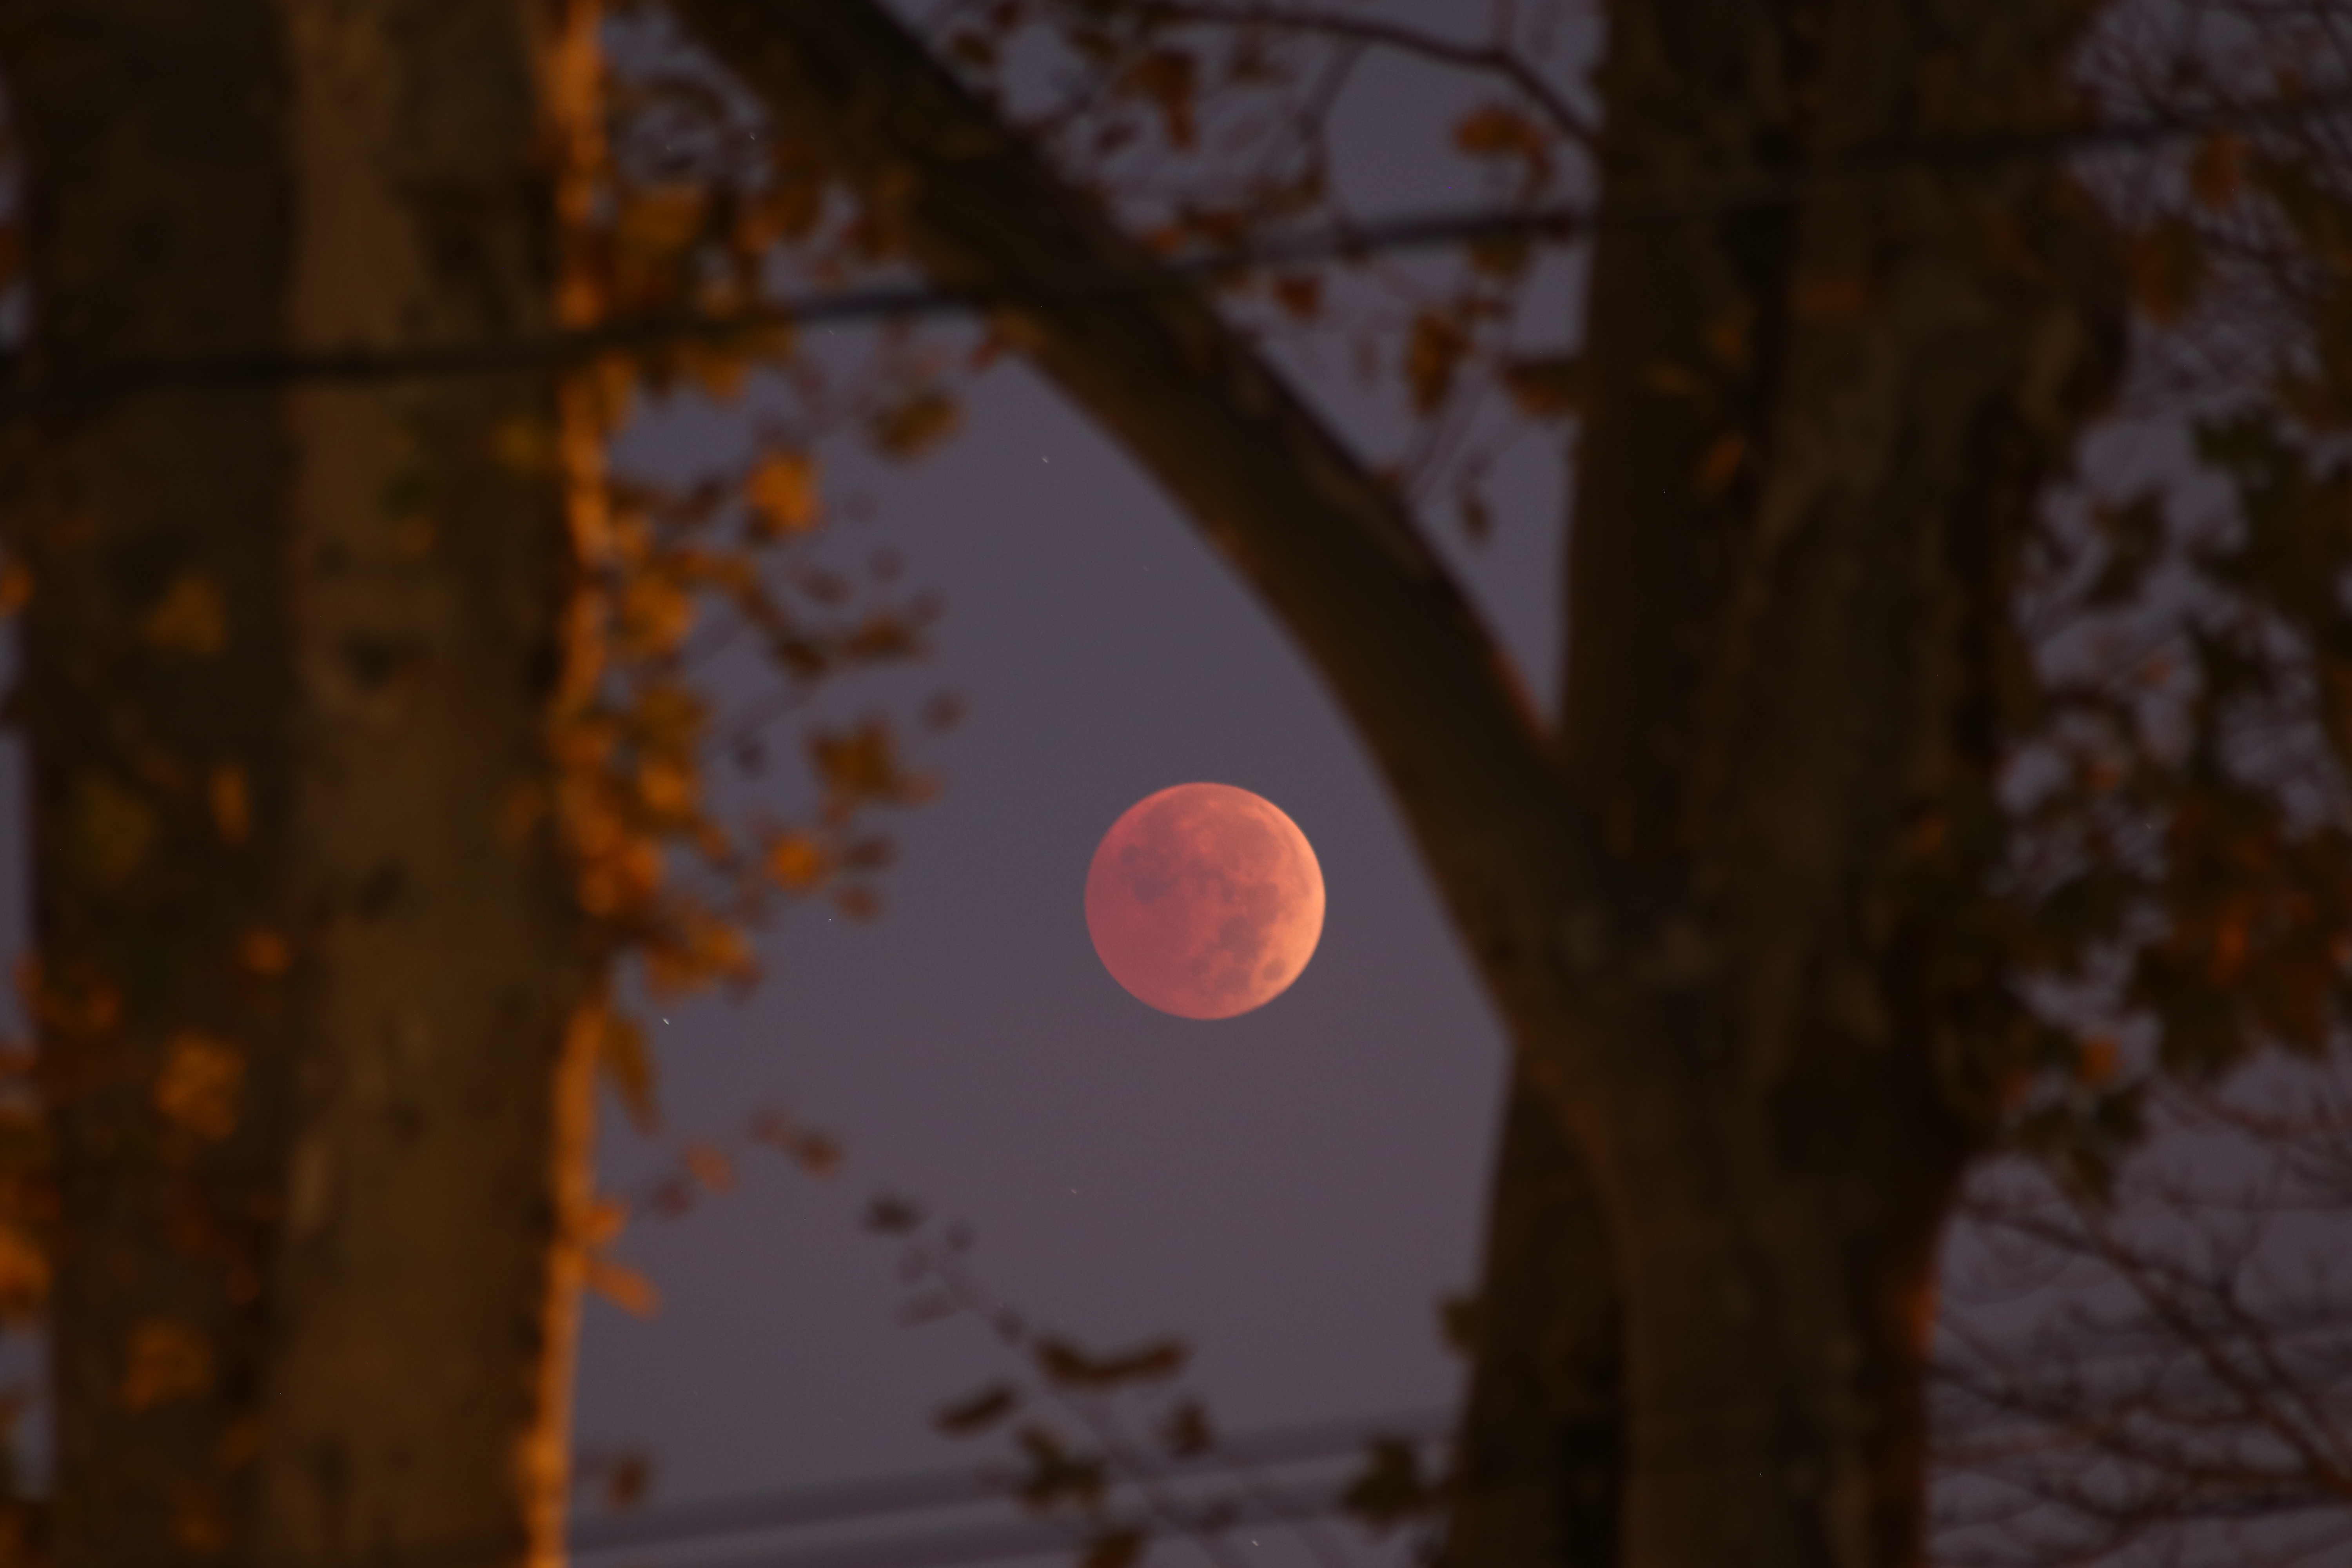 The fully eclipsed moon passes behind the trees in New York City on Nov. 8, 2022. (Photo by Islam Dogru/Anadolu Agency via Getty Images)